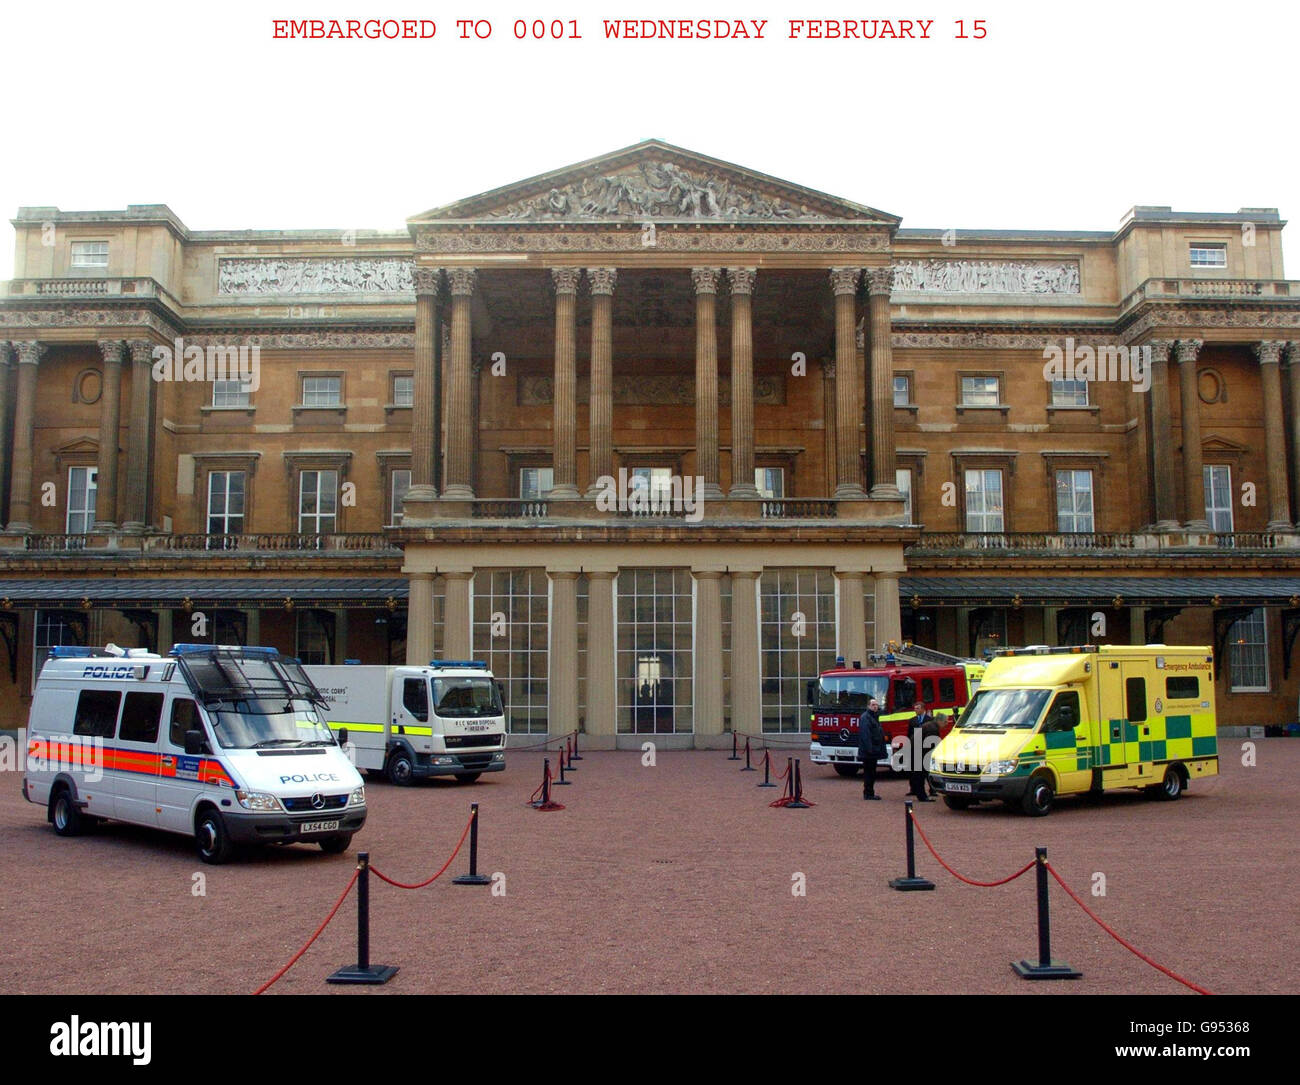 Emergency response vehicles gather in the quadrangle at Buckingham Palace in central London, Tuesday February 14, 2006. Emergency response vehicles were set to gather at the palace ahead of tomorrow's Emergency Services & Disaster Response Reception to be held at Buckingham Palace by invitation of Queen Elizabeth II. PRESS ASSOCIATION Photo. Photo credit should read: Johnny Green/WPA Rota/PA. Stock Photo